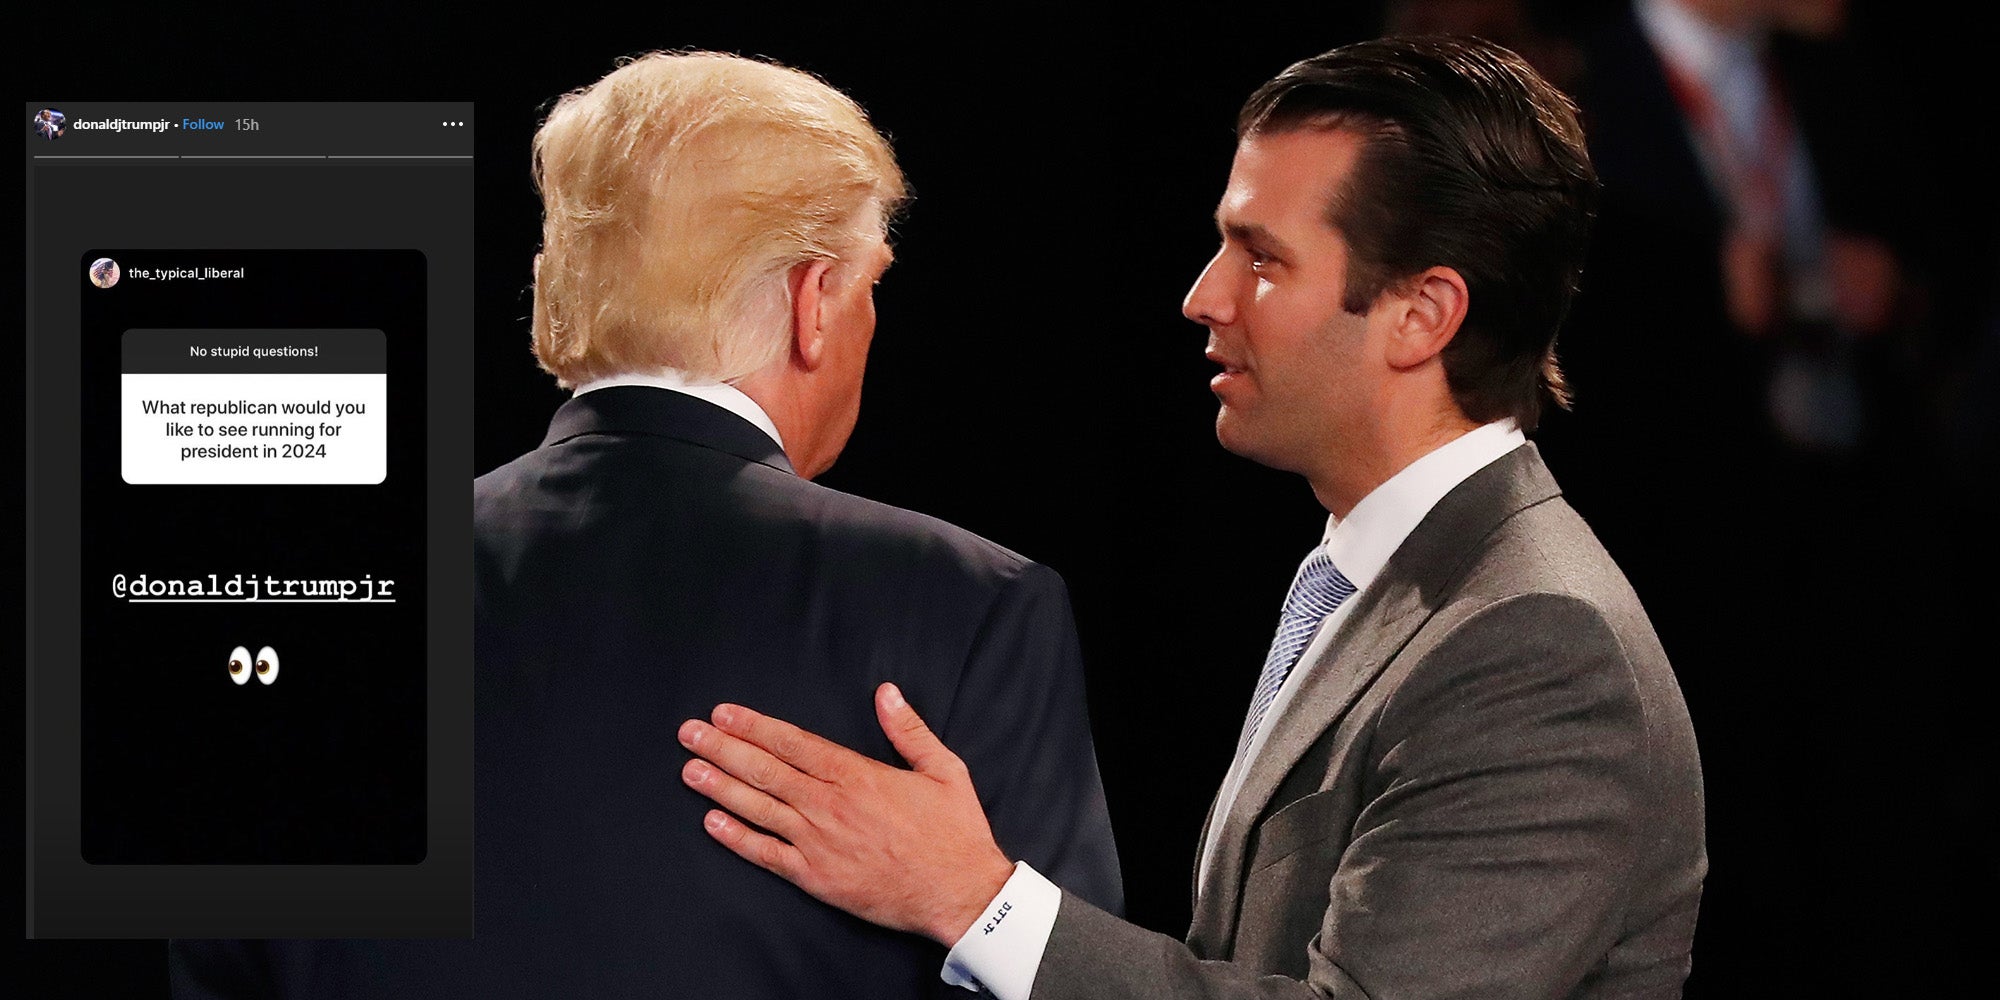 Trump Jr may have just hinted he's running for president in 2024 and